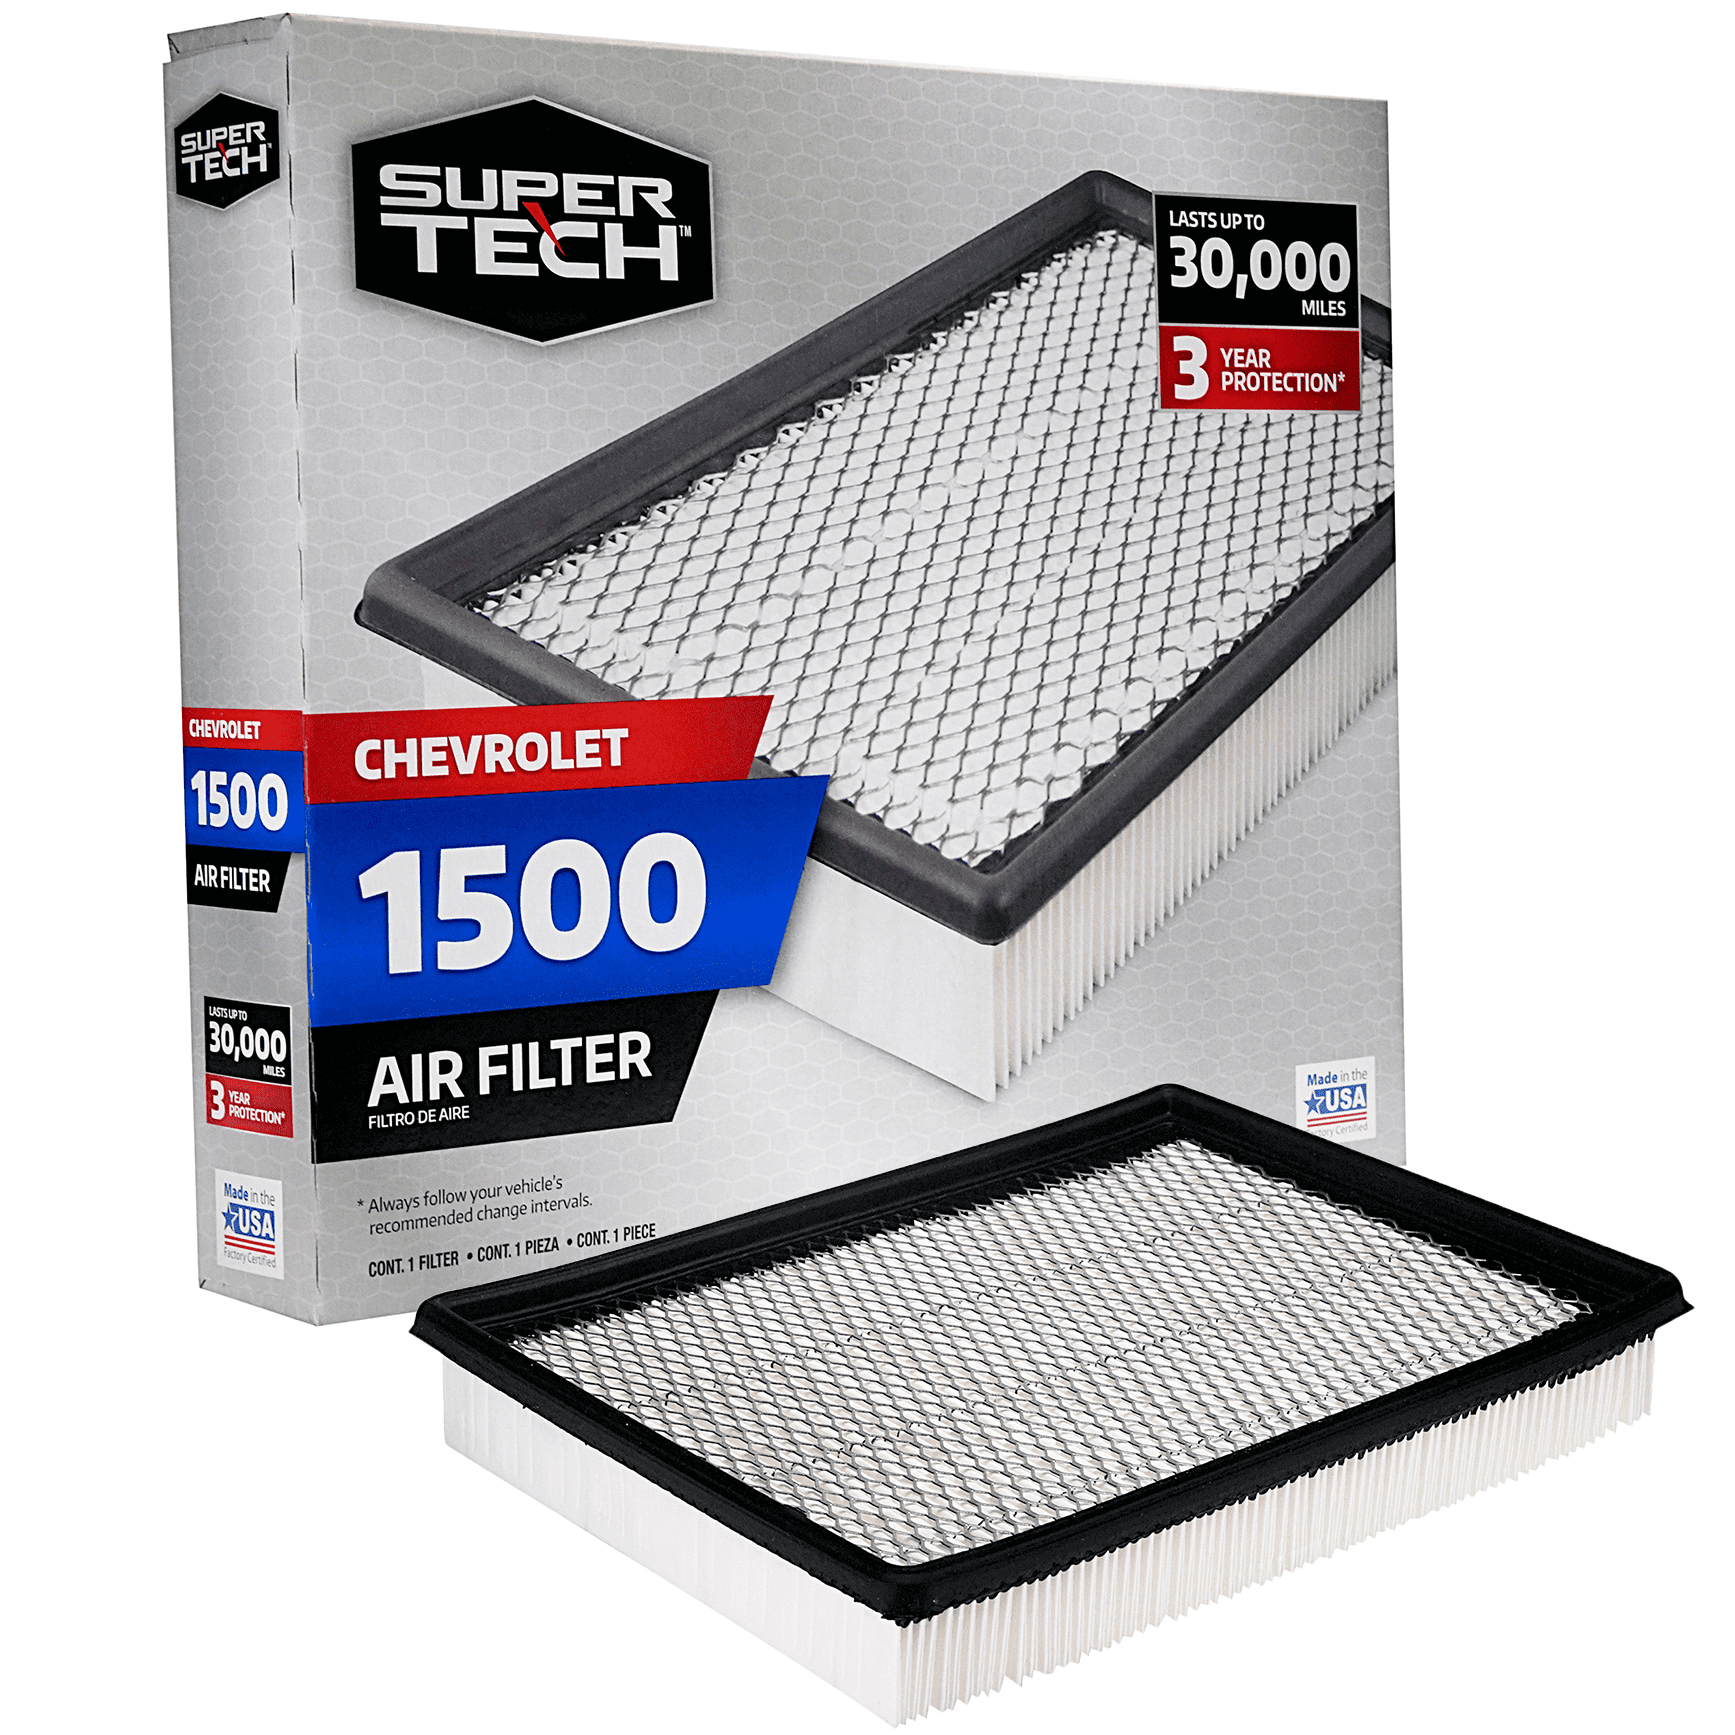 SuperTech 1500 Engine Air Filter, Replacement Filter for GM or Chevrolet